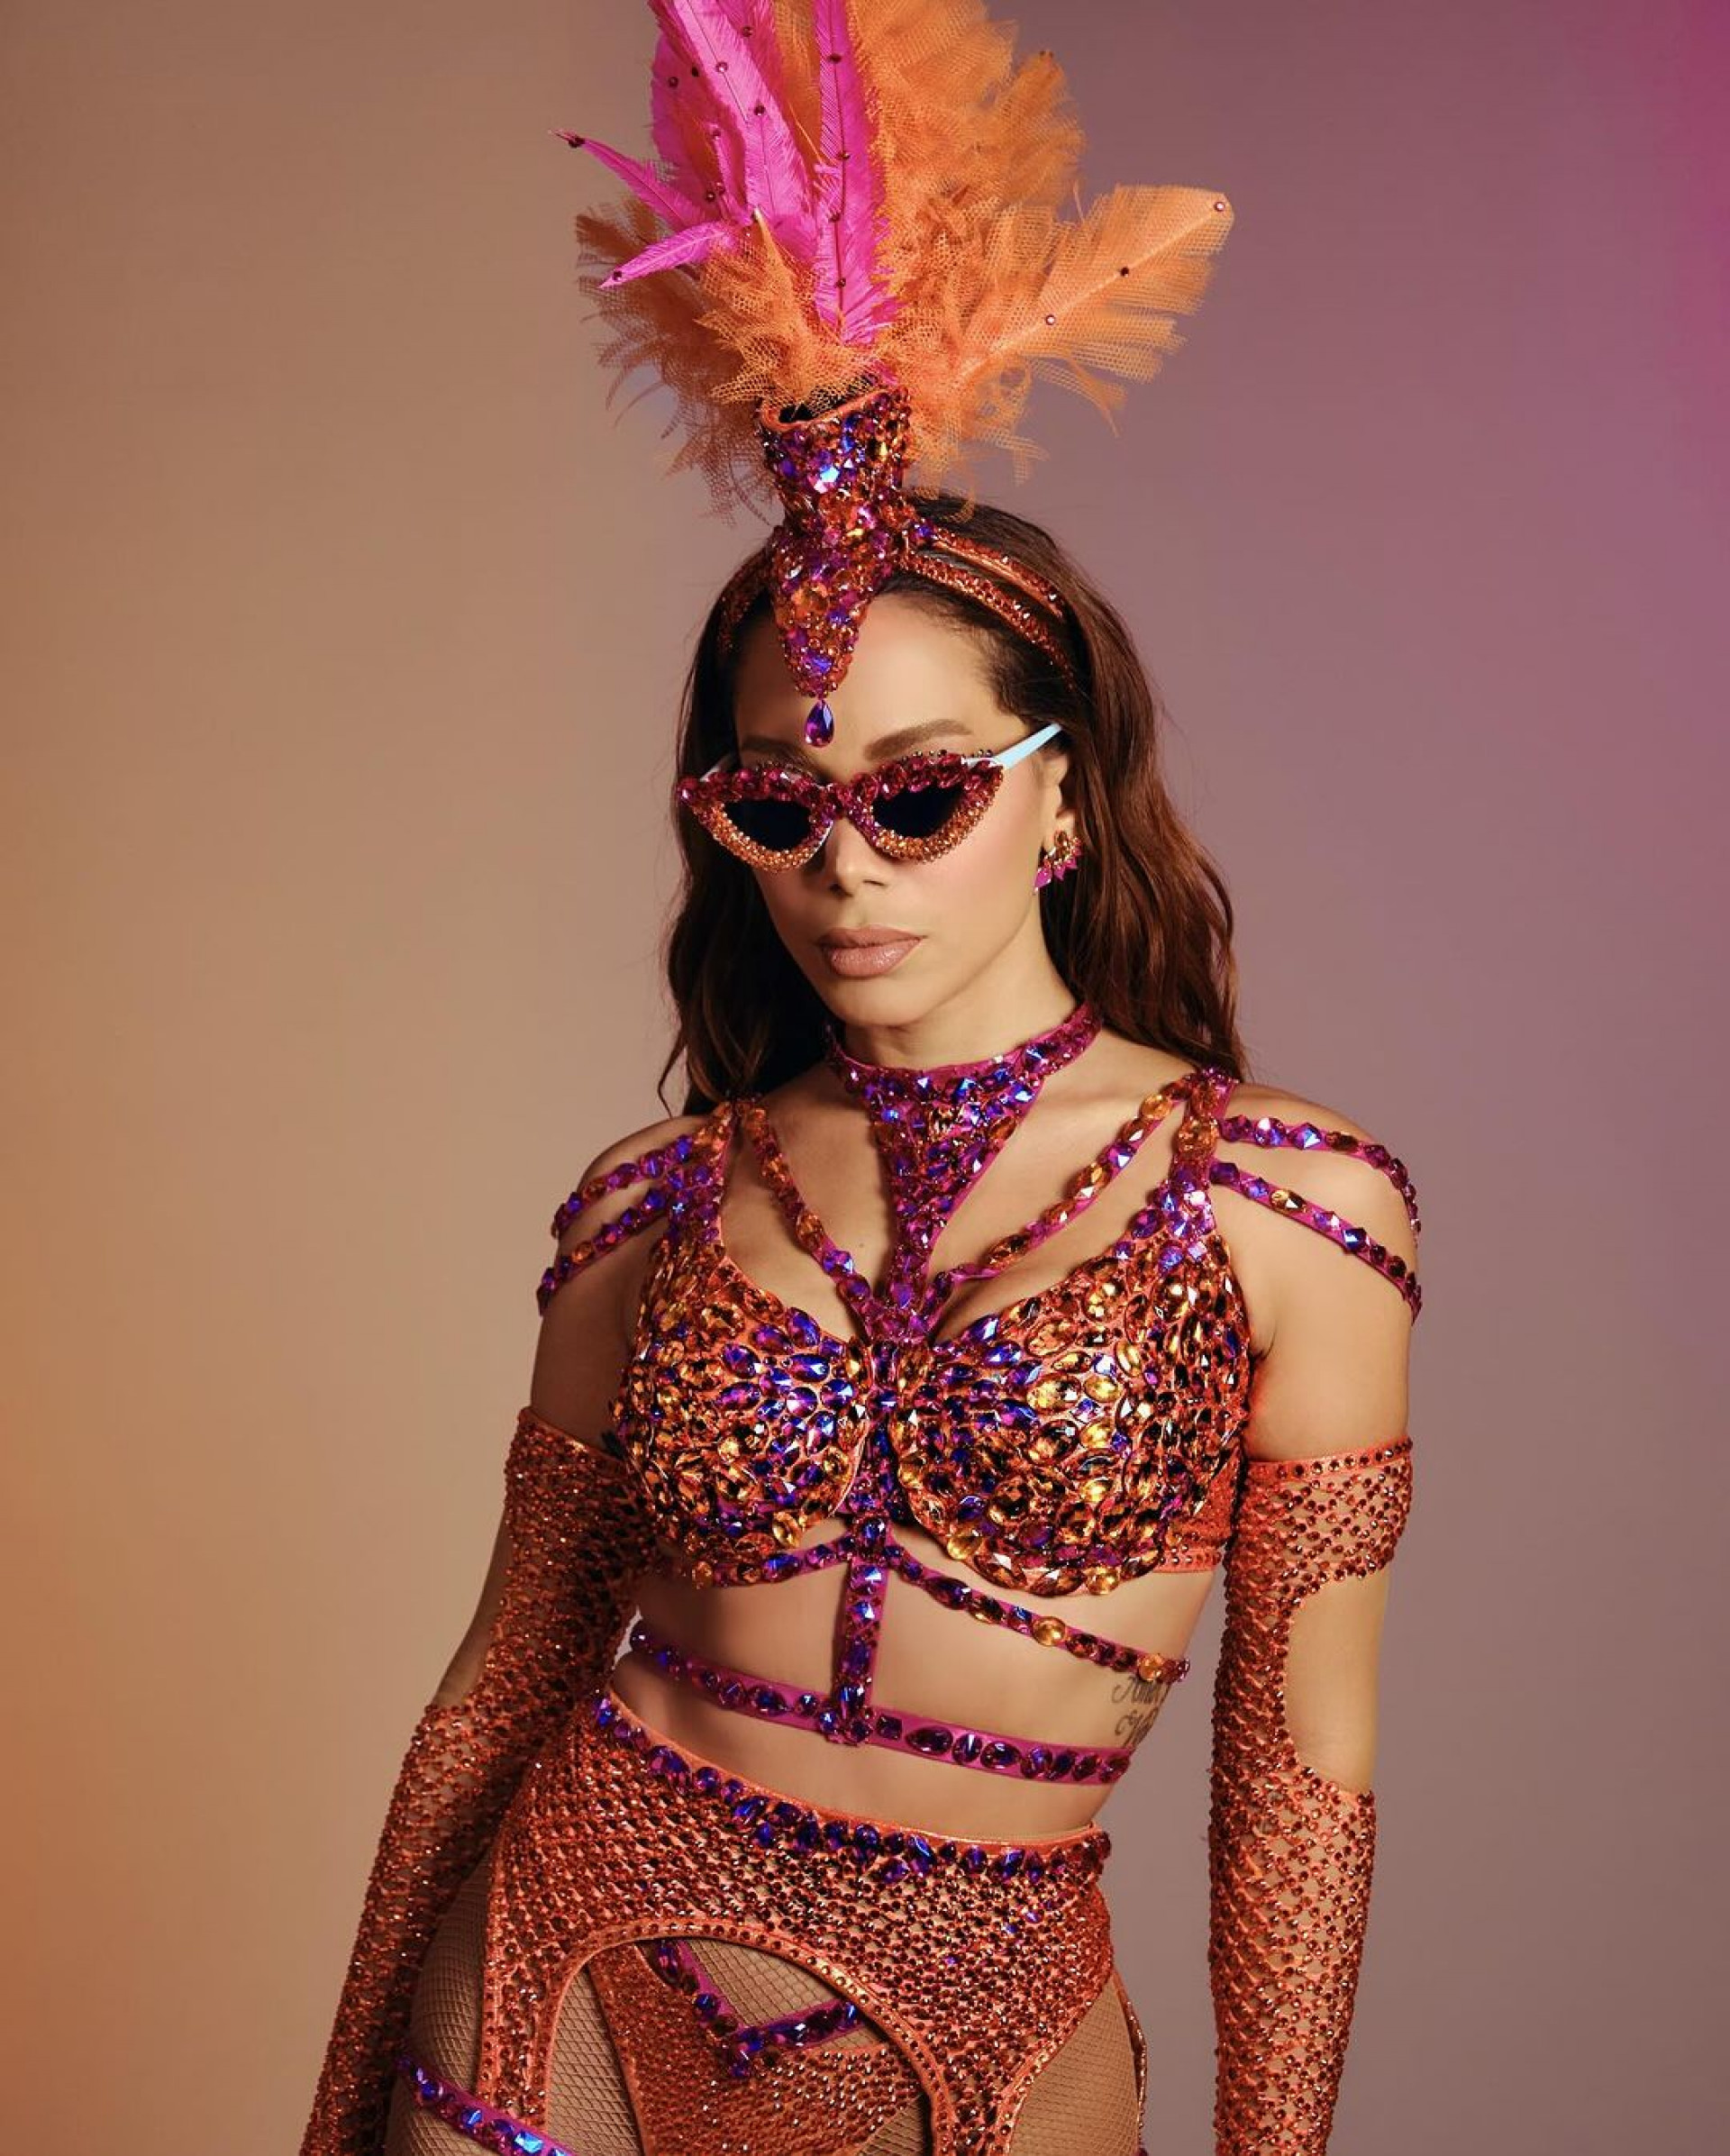 Anitta pays homage to Império Serrano in São Paulo with a solar look - Fred Othero / Disclosure